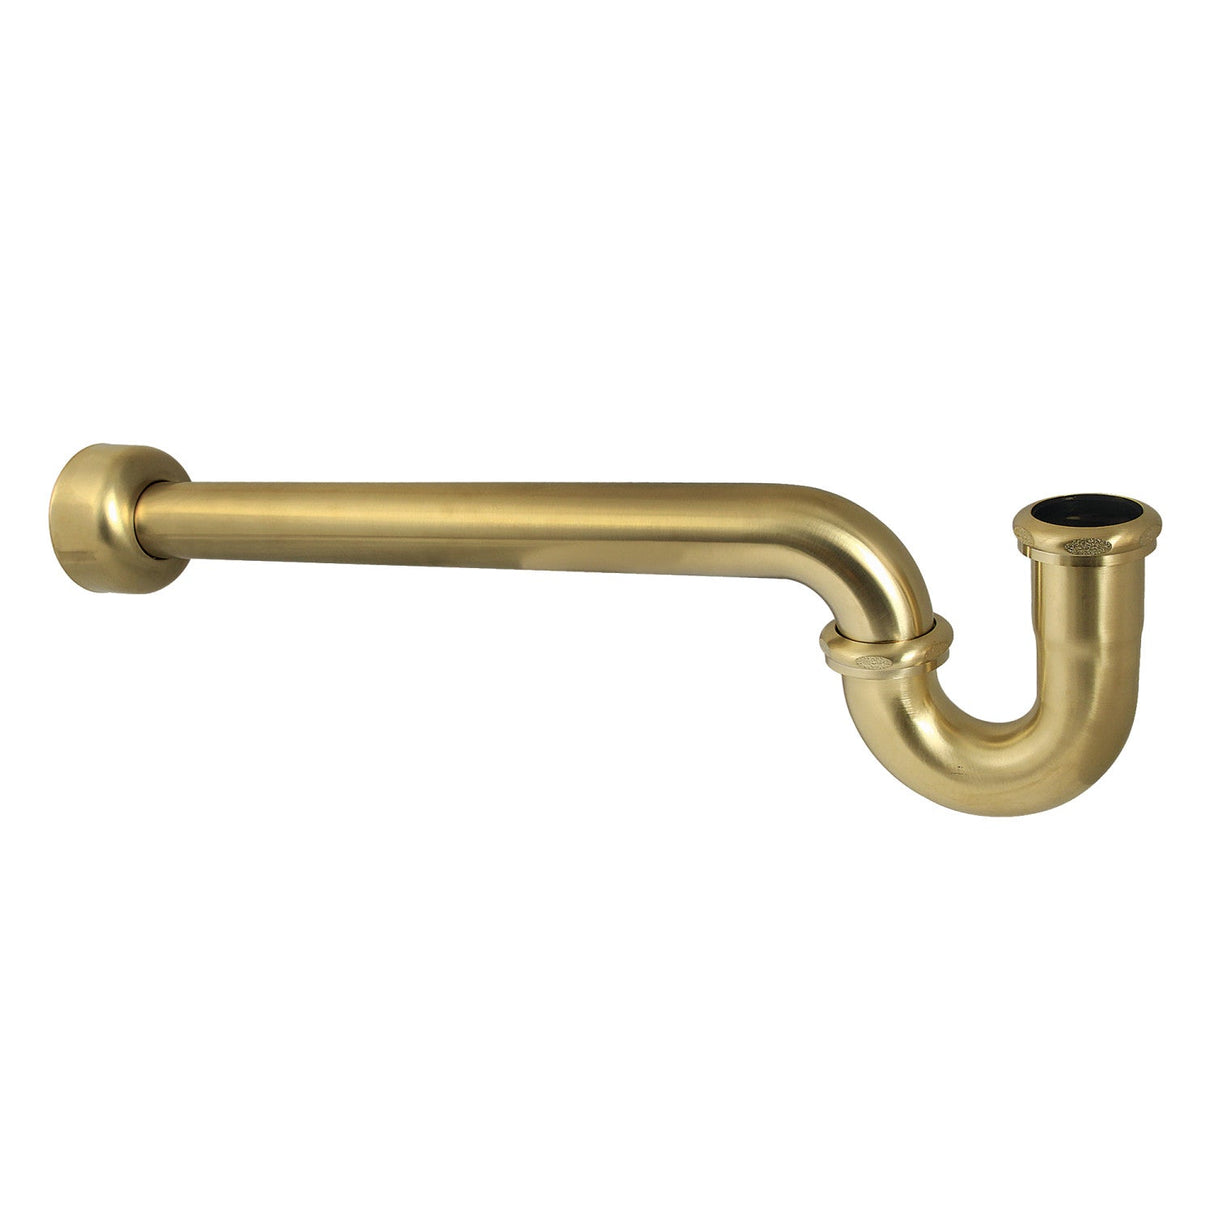 Trimscape CC6127 1-1/2 Inch Decor P-Trap with High Box Flange, 19 Inch Length, 18 Gauge, Brushed Brass